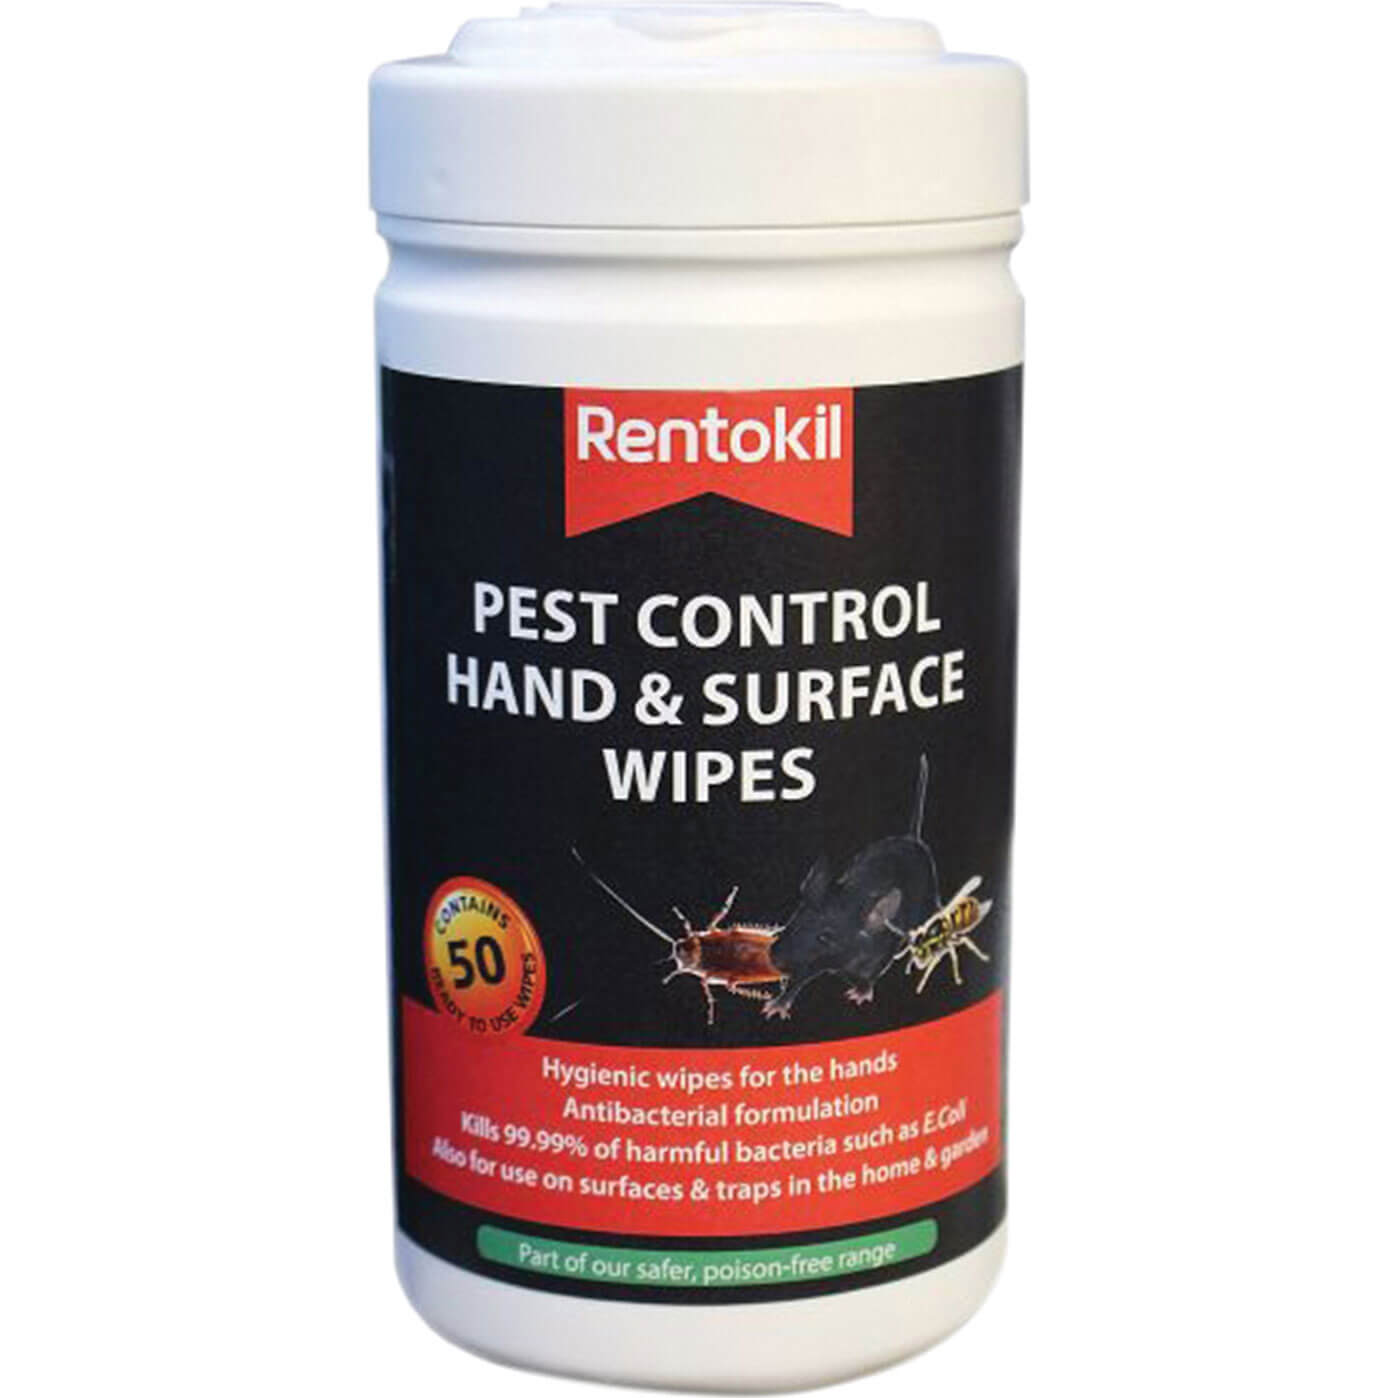 Image of Rentokil Pest Control Hand and Surface Wipes